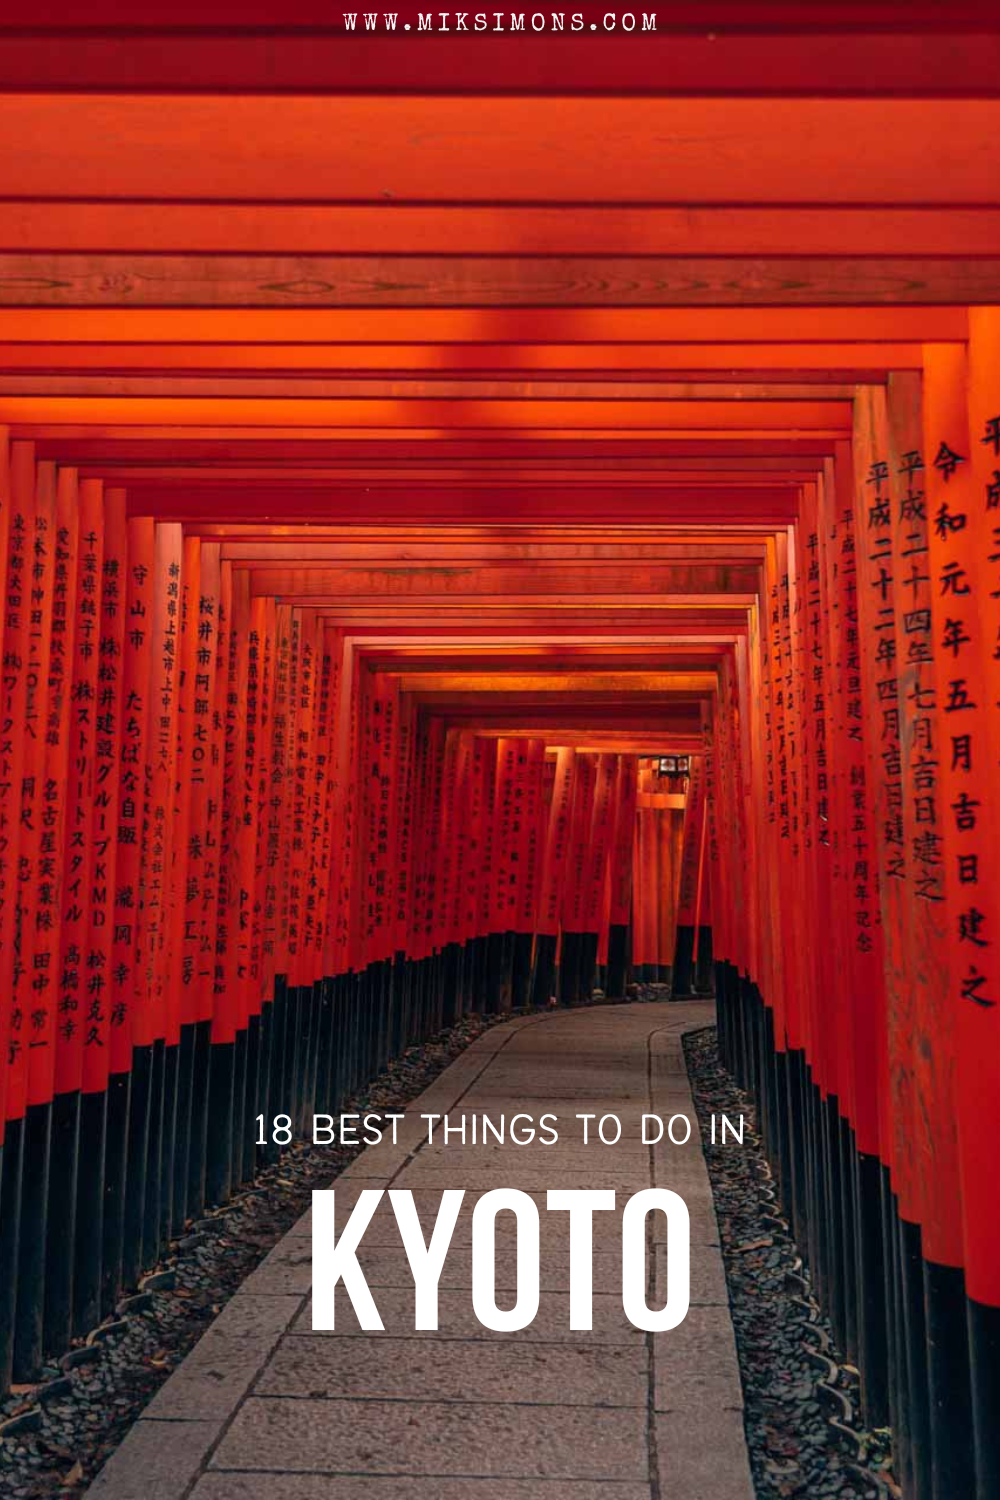 18 best things to do in Kyoto